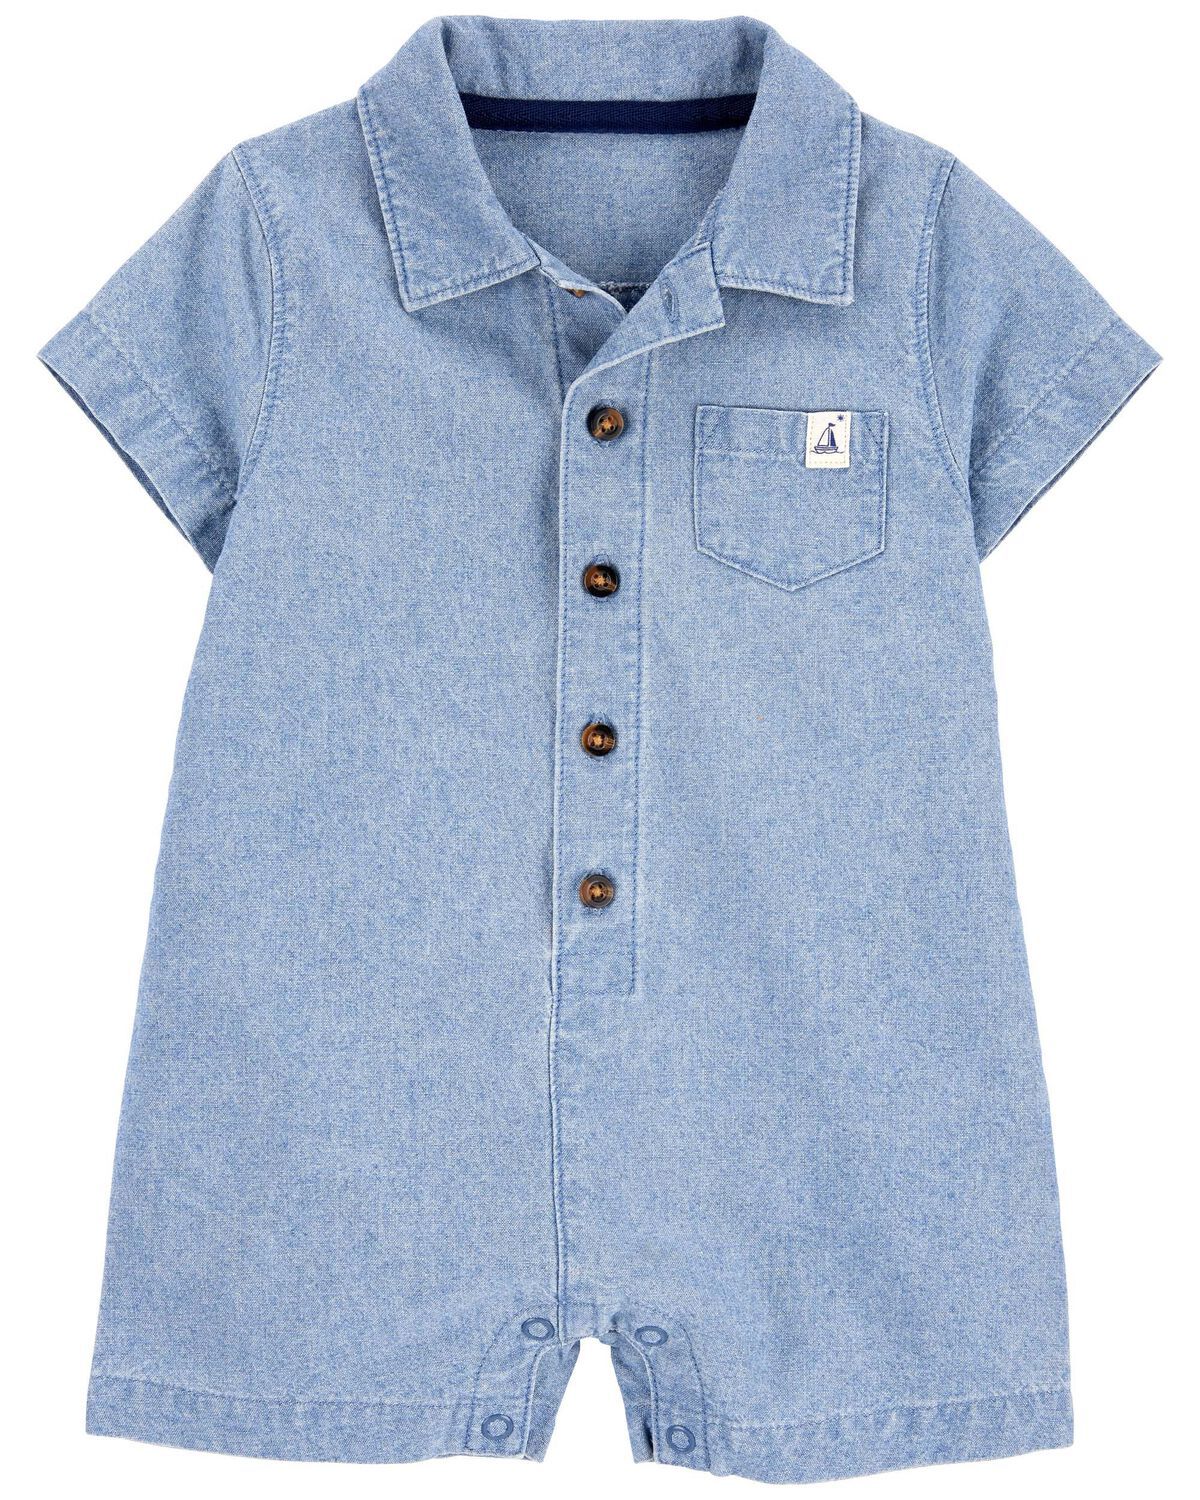 Chambray Baby Chambray Romper | carters.com | Carter's